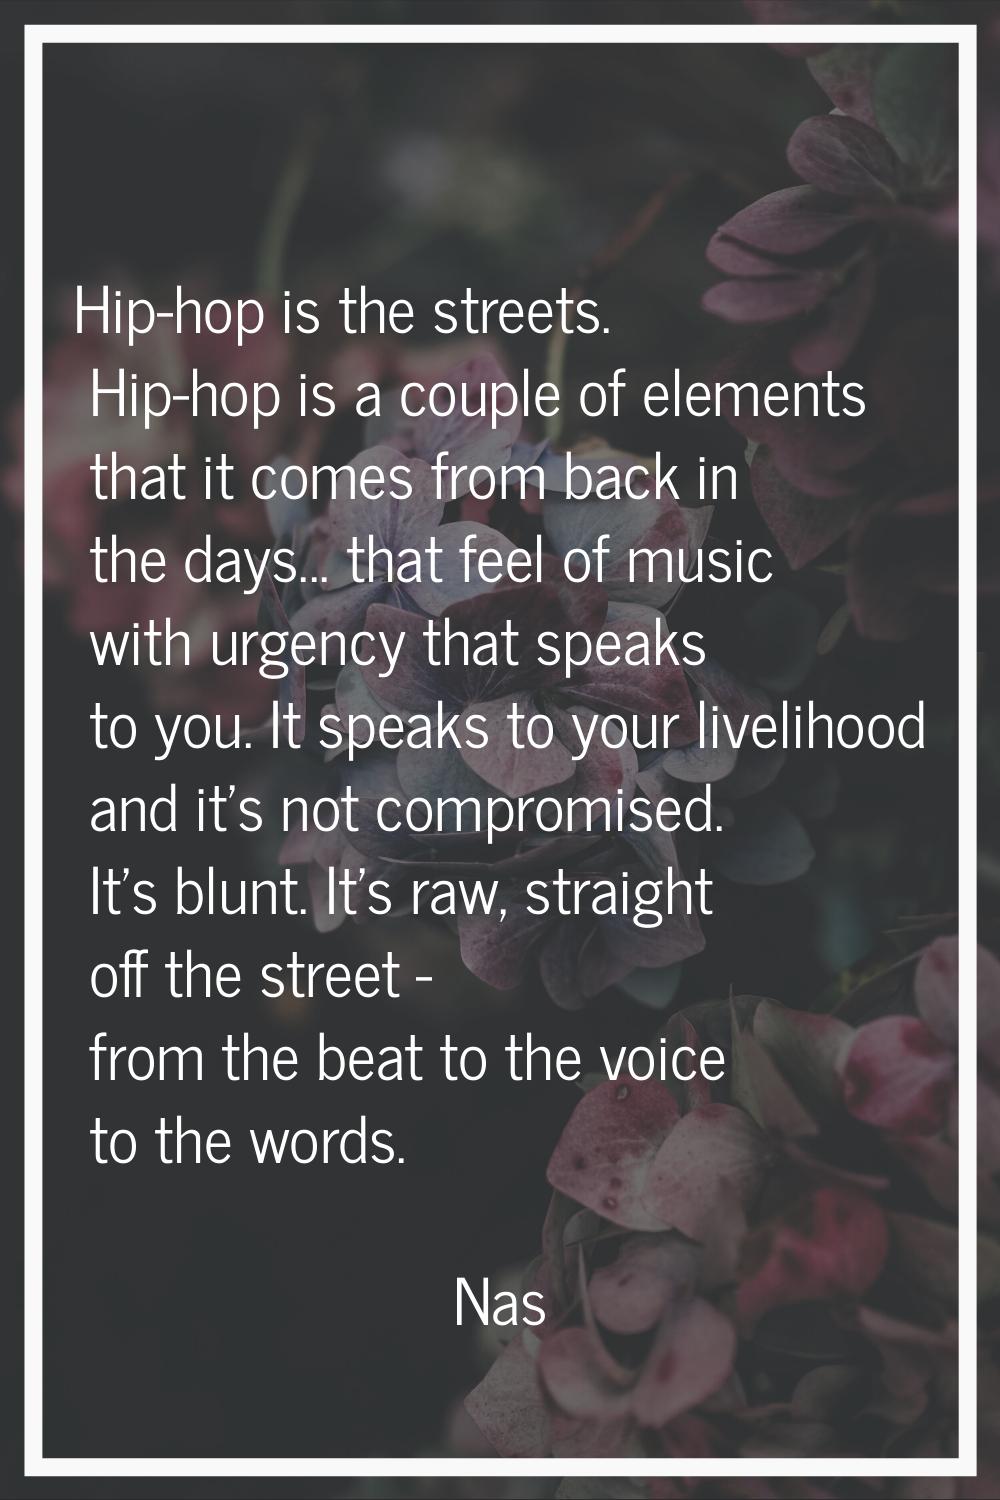 Hip-hop is the streets. Hip-hop is a couple of elements that it comes from back in the days... that